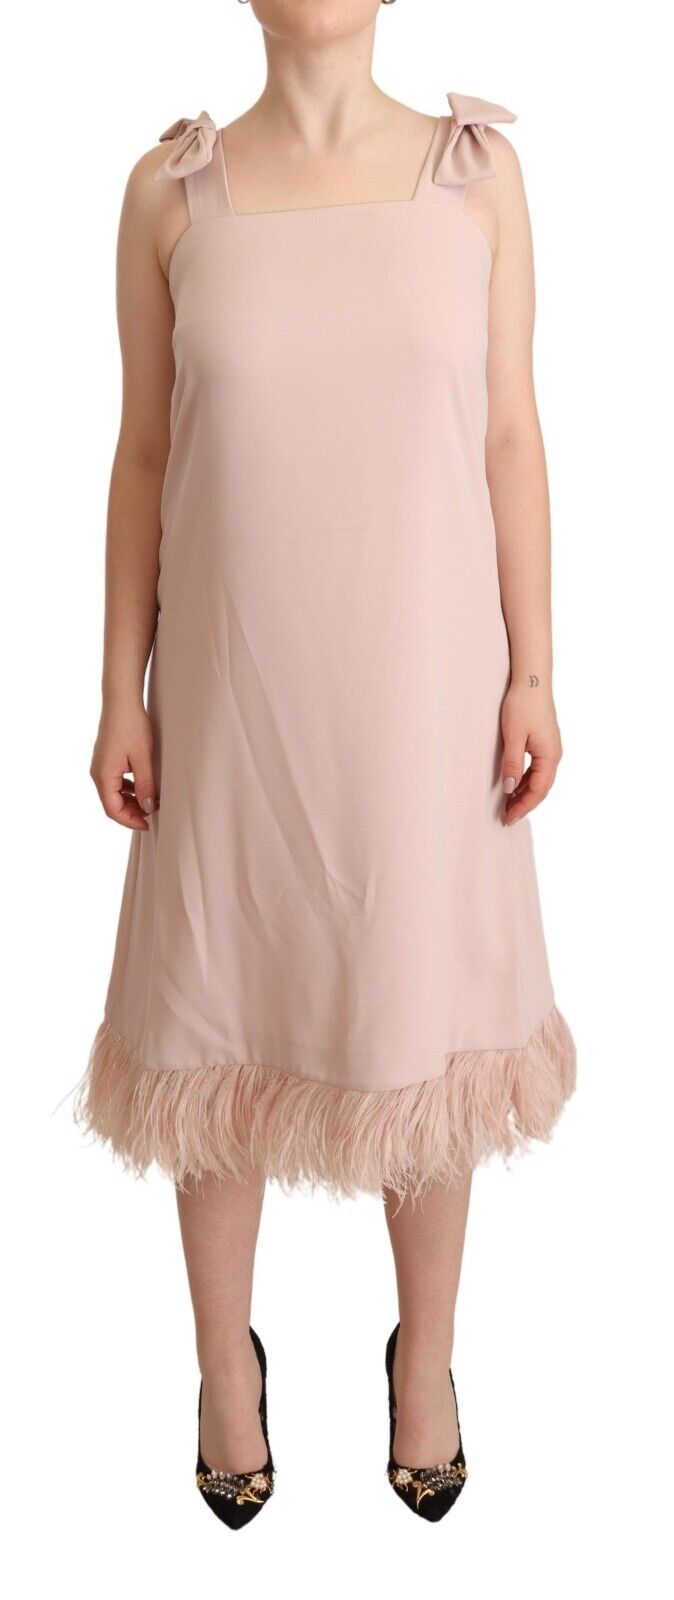 P.A.R.O.S.H. Chic Sleeveless Midi Dress with Feather Trim